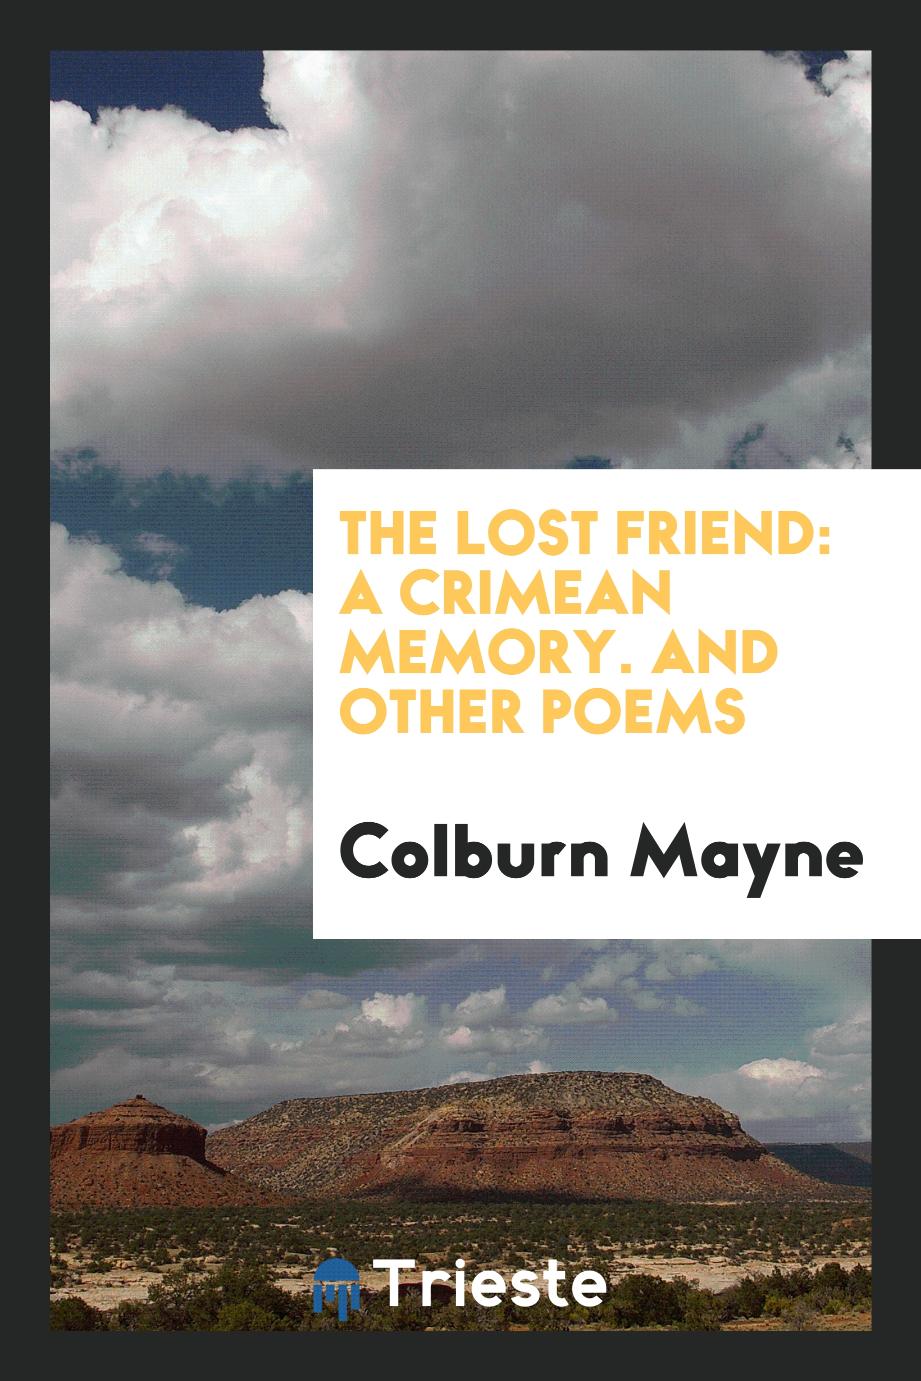 The Lost Friend: A Crimean Memory. And Other Poems